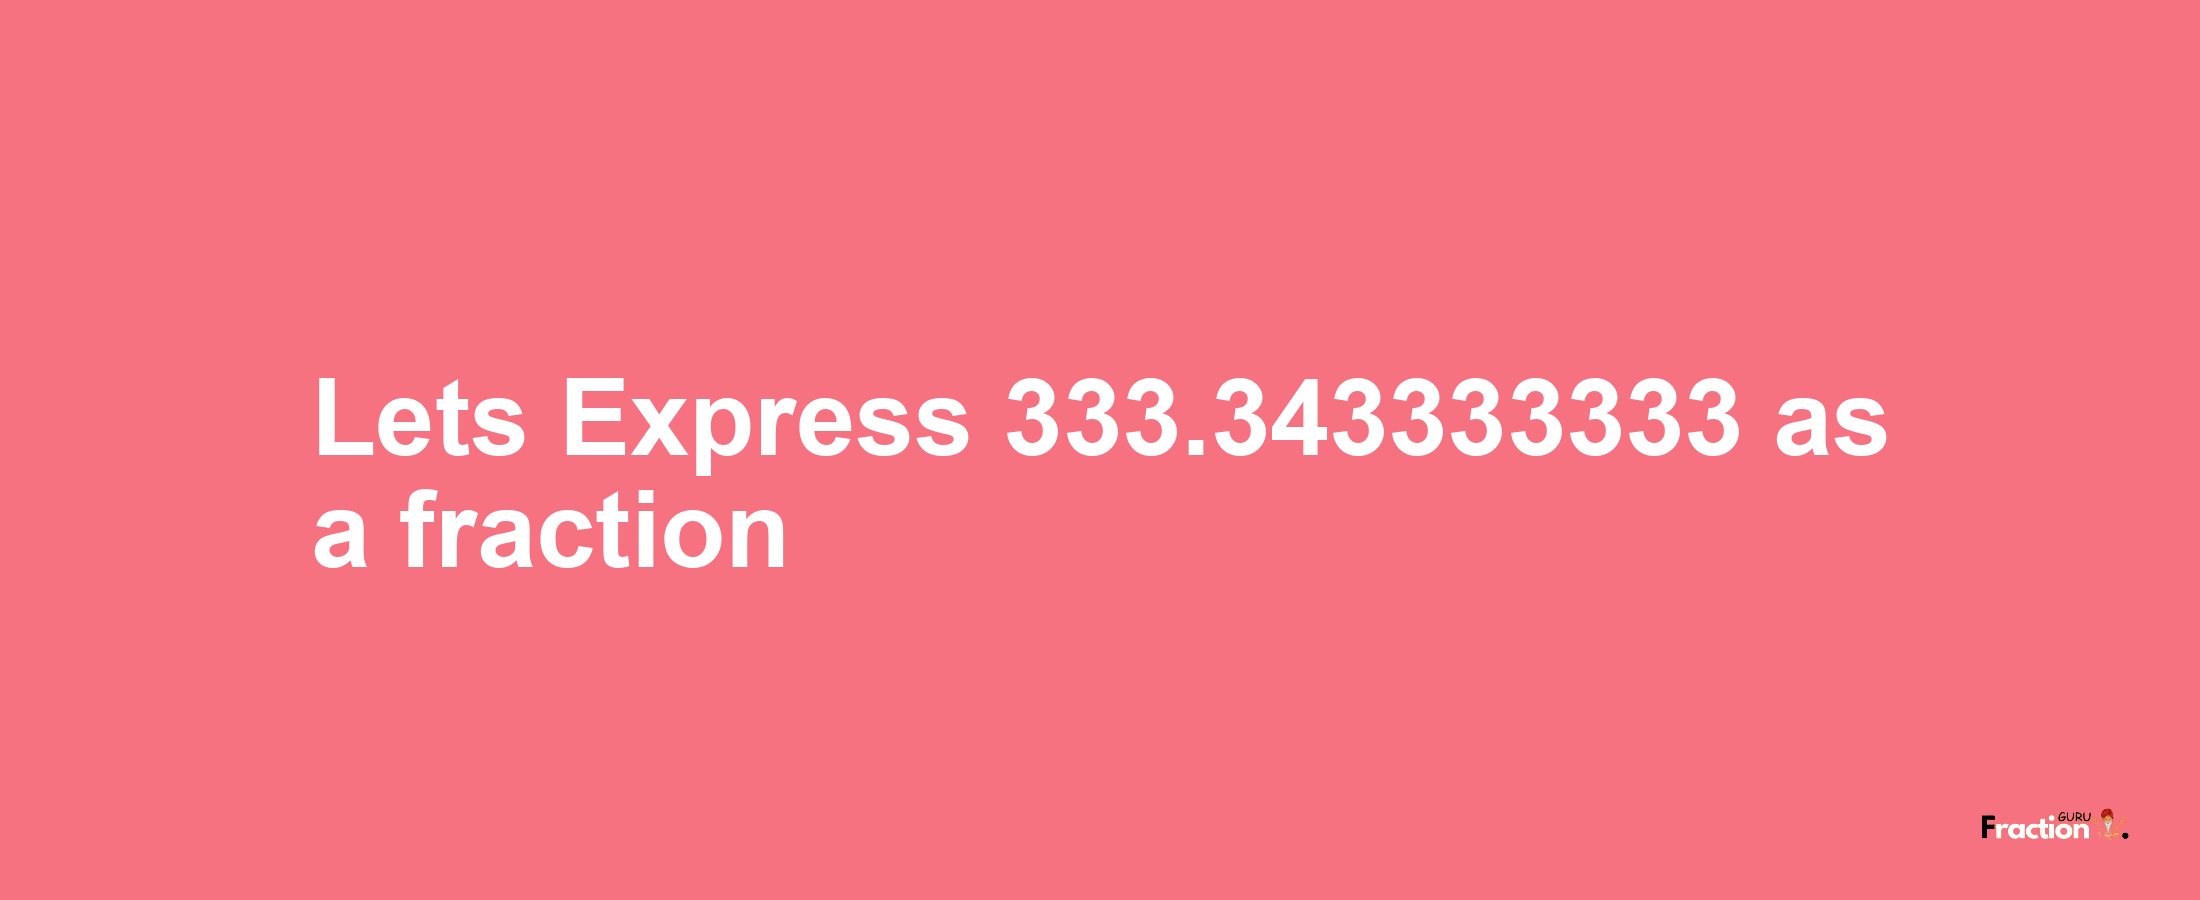 Lets Express 333.343333333 as afraction